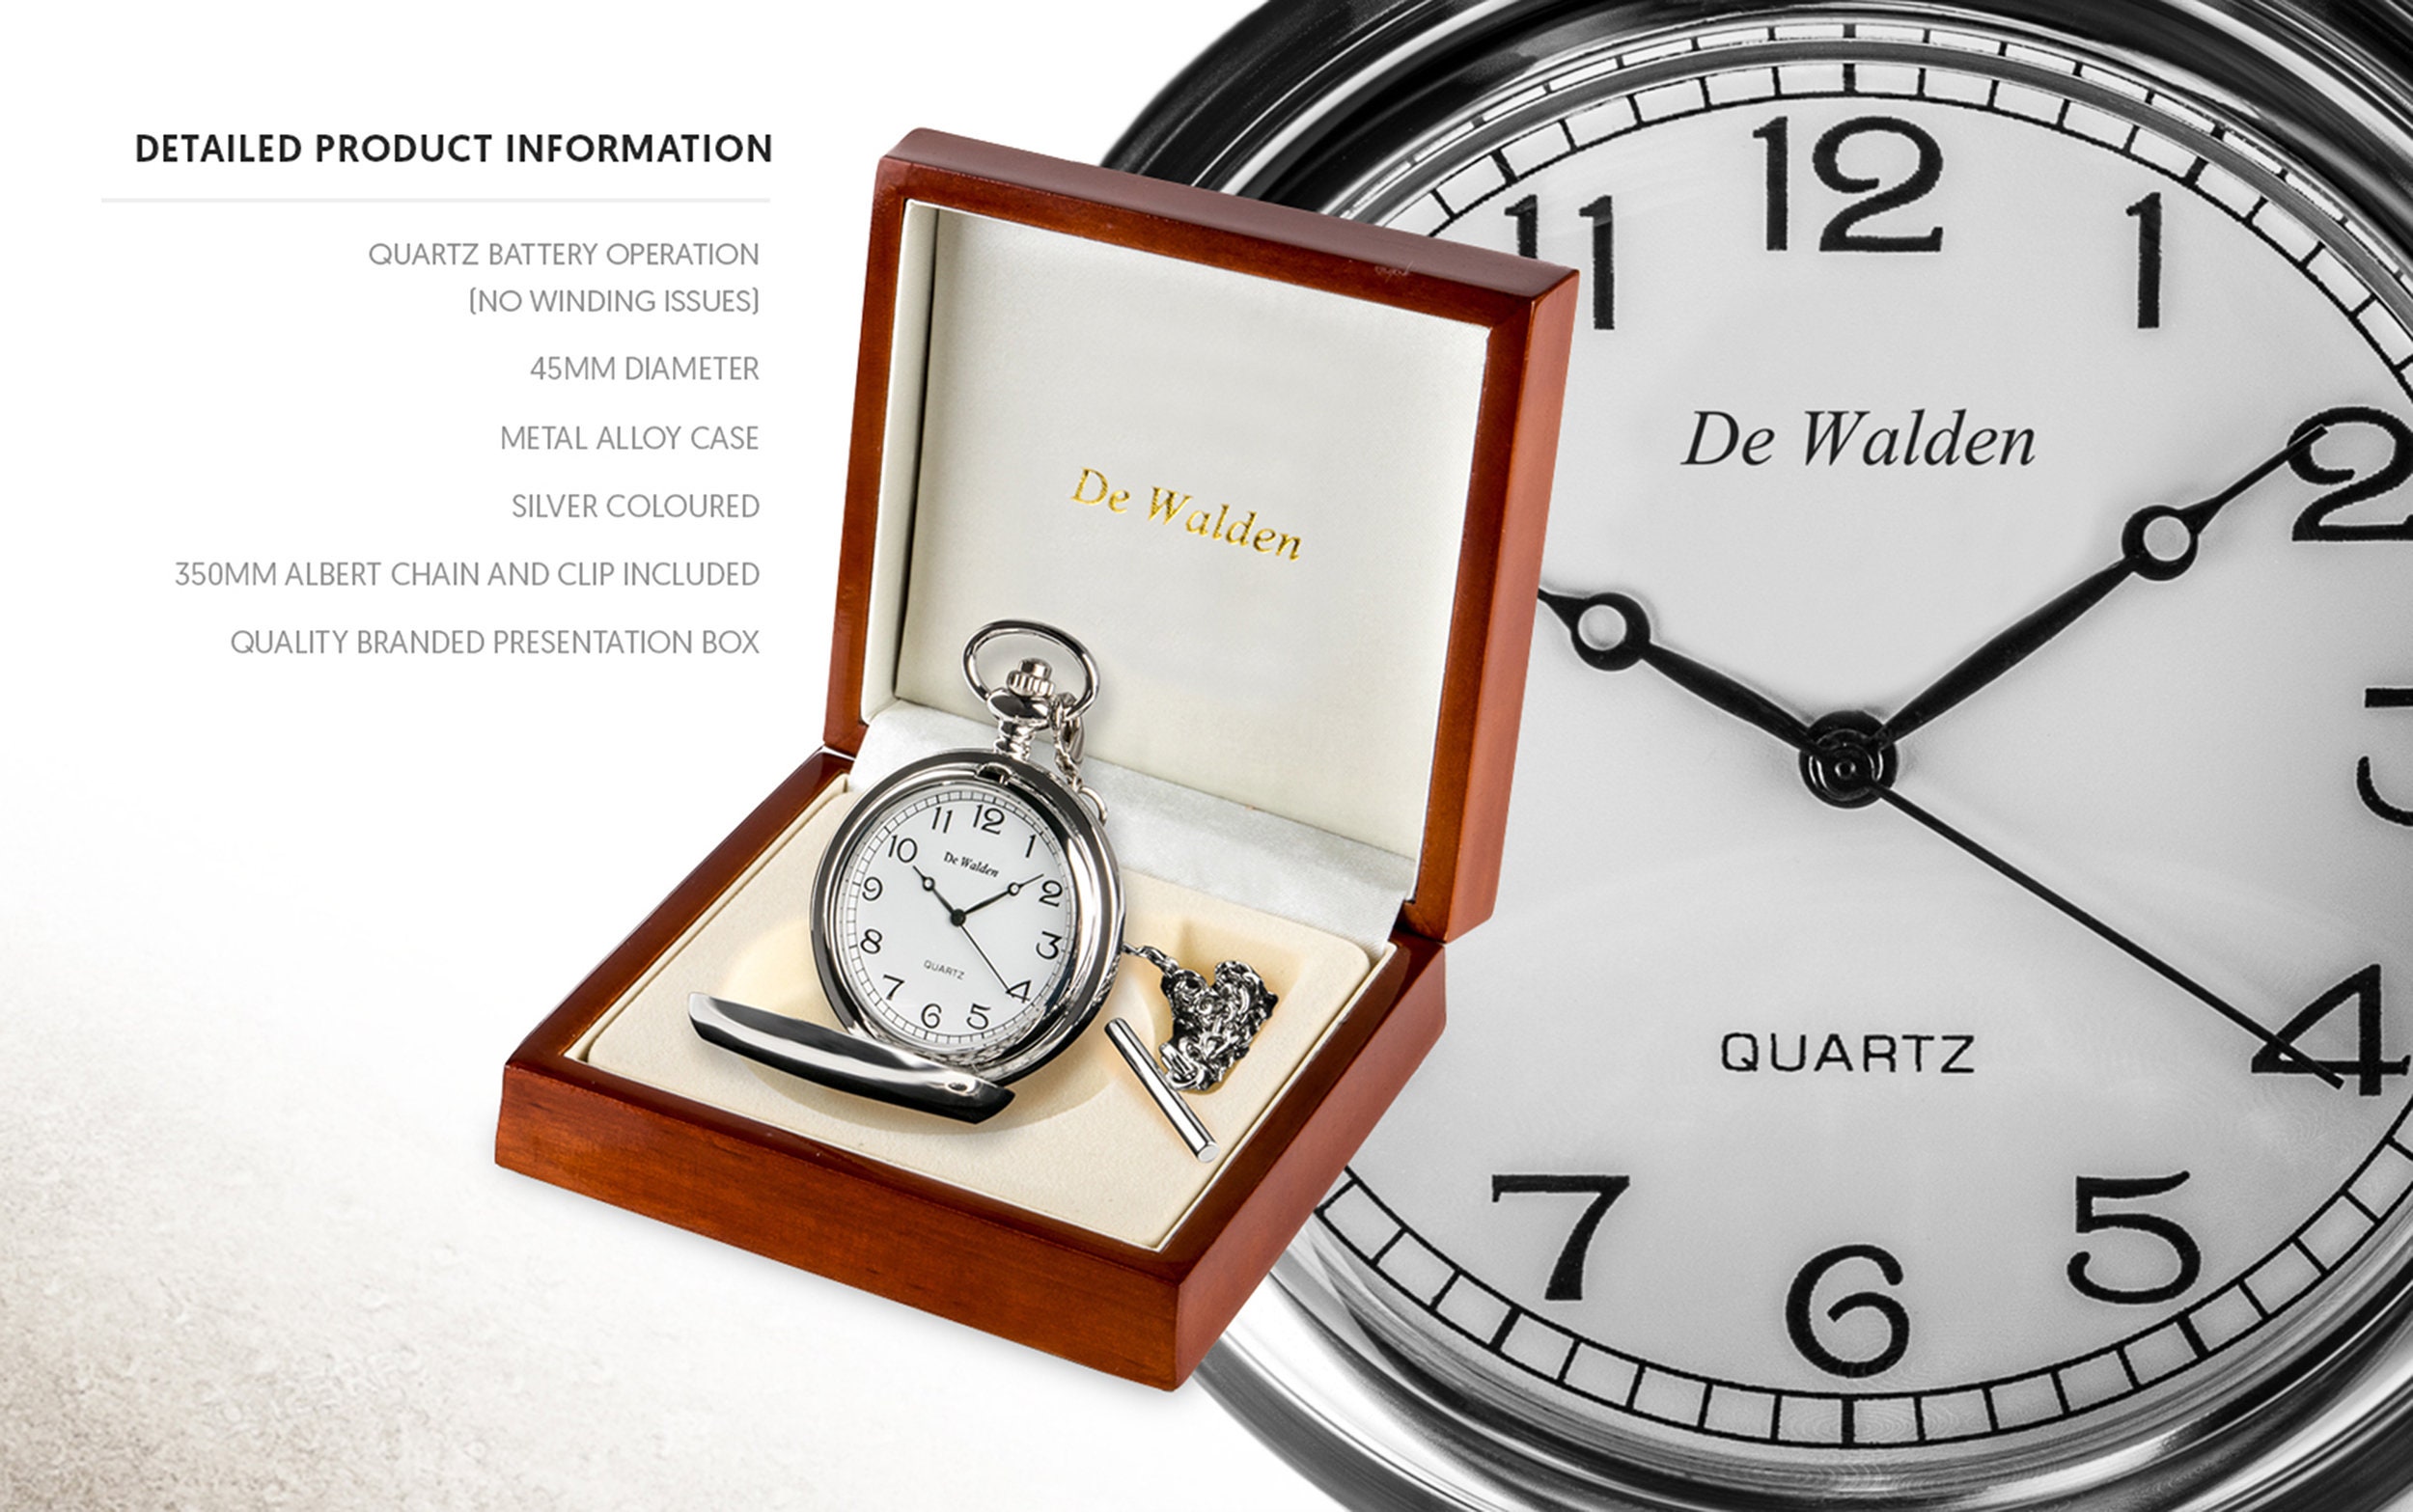 Mens Engraved Quality Pocket Watch Congratulations On Your Retirement Feature Case Front in A Luxury Wooden Box Colleague Friend Employee